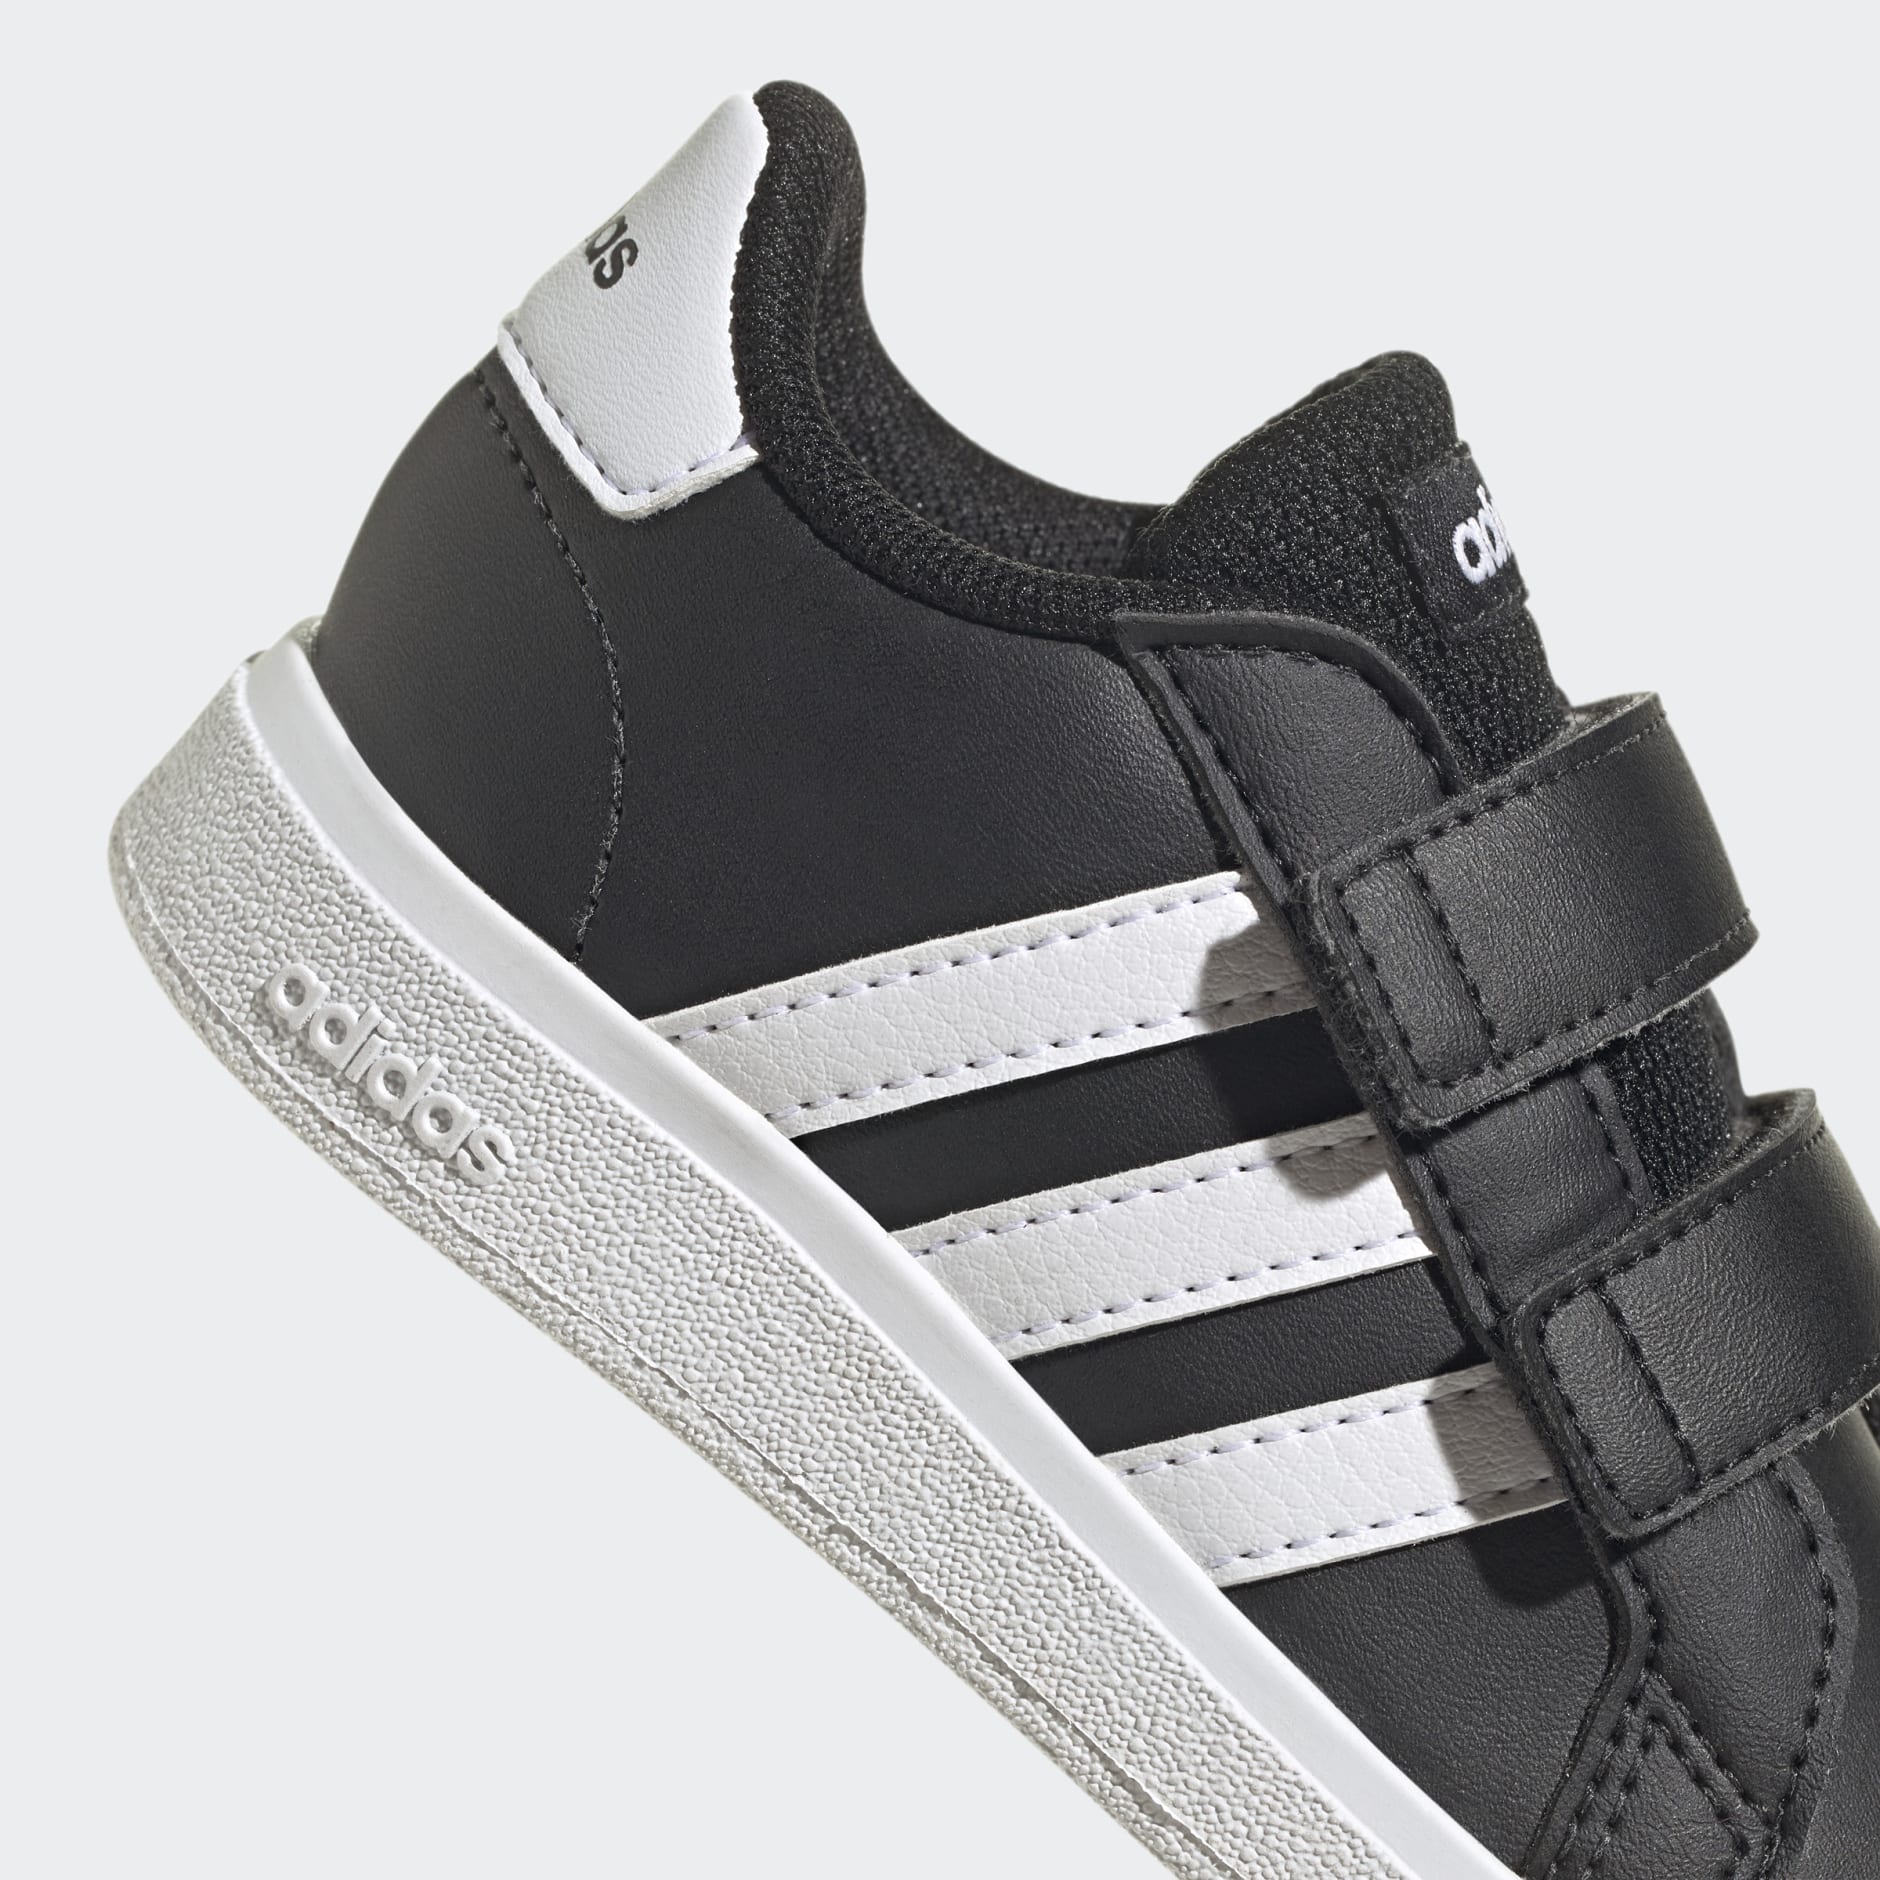 adidas Grand Court Lifestyle Hook and Loop Shoes - Black